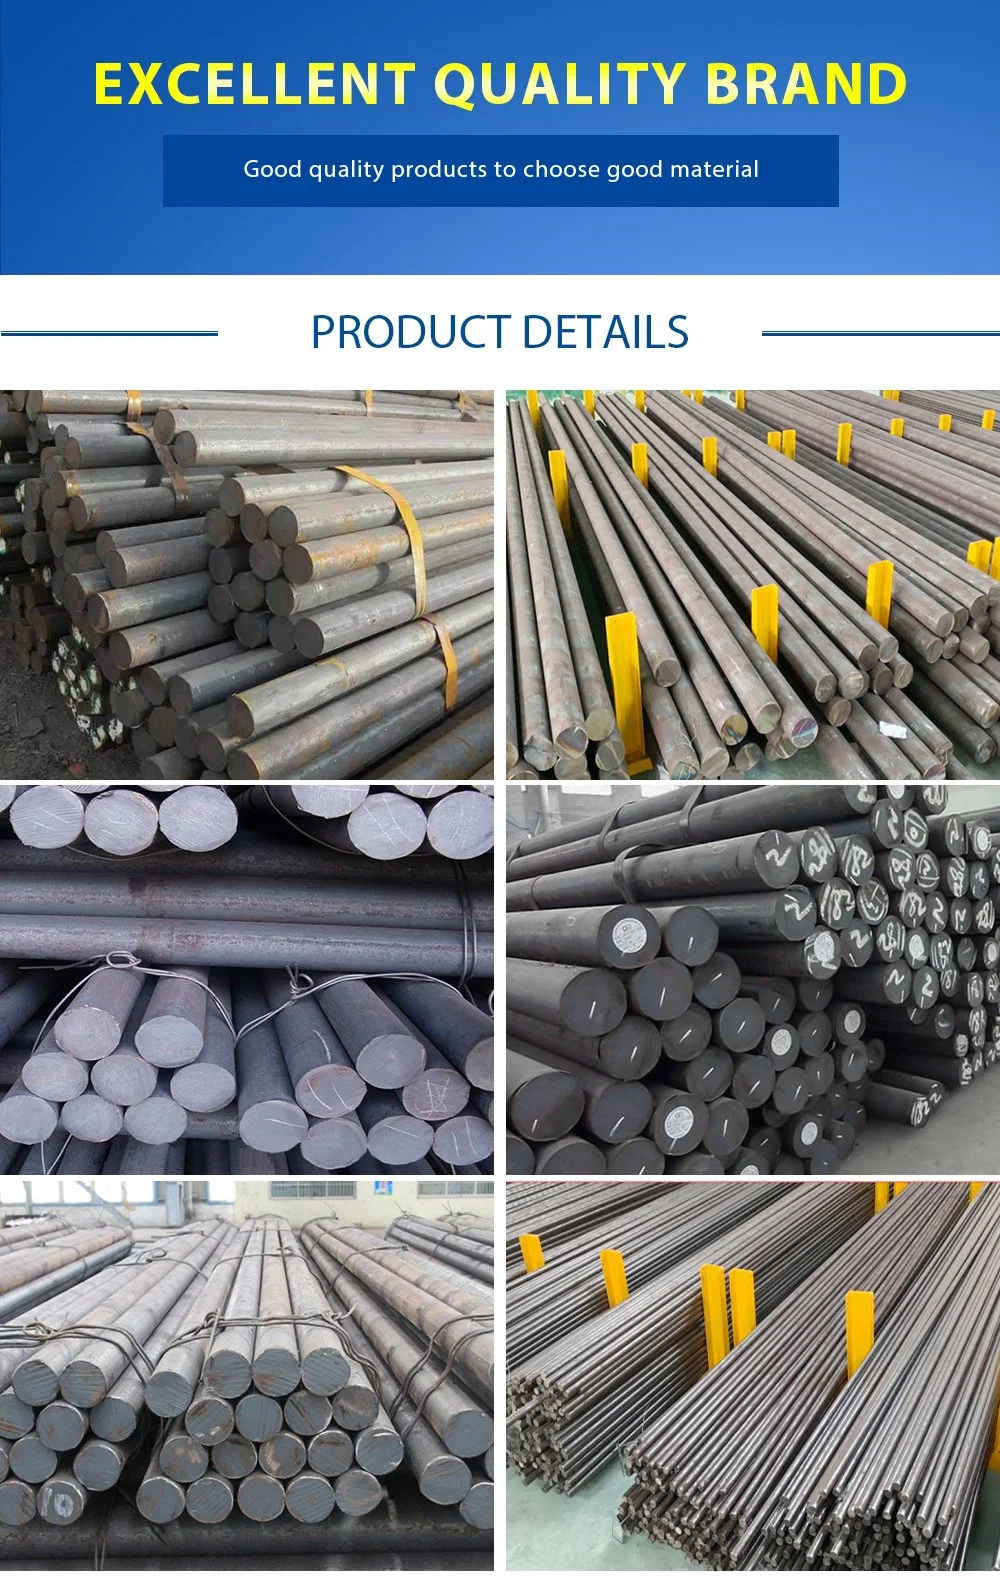 China SAE 1020 S20c Ss440 A36 Q235 Q345 1045 S45c 4140 En19 Scm440 40cr B7 42CrMo4 1215 1144 Cold Finished Cold Drawn Bright Steel Round Bar Carbon Steel Bar